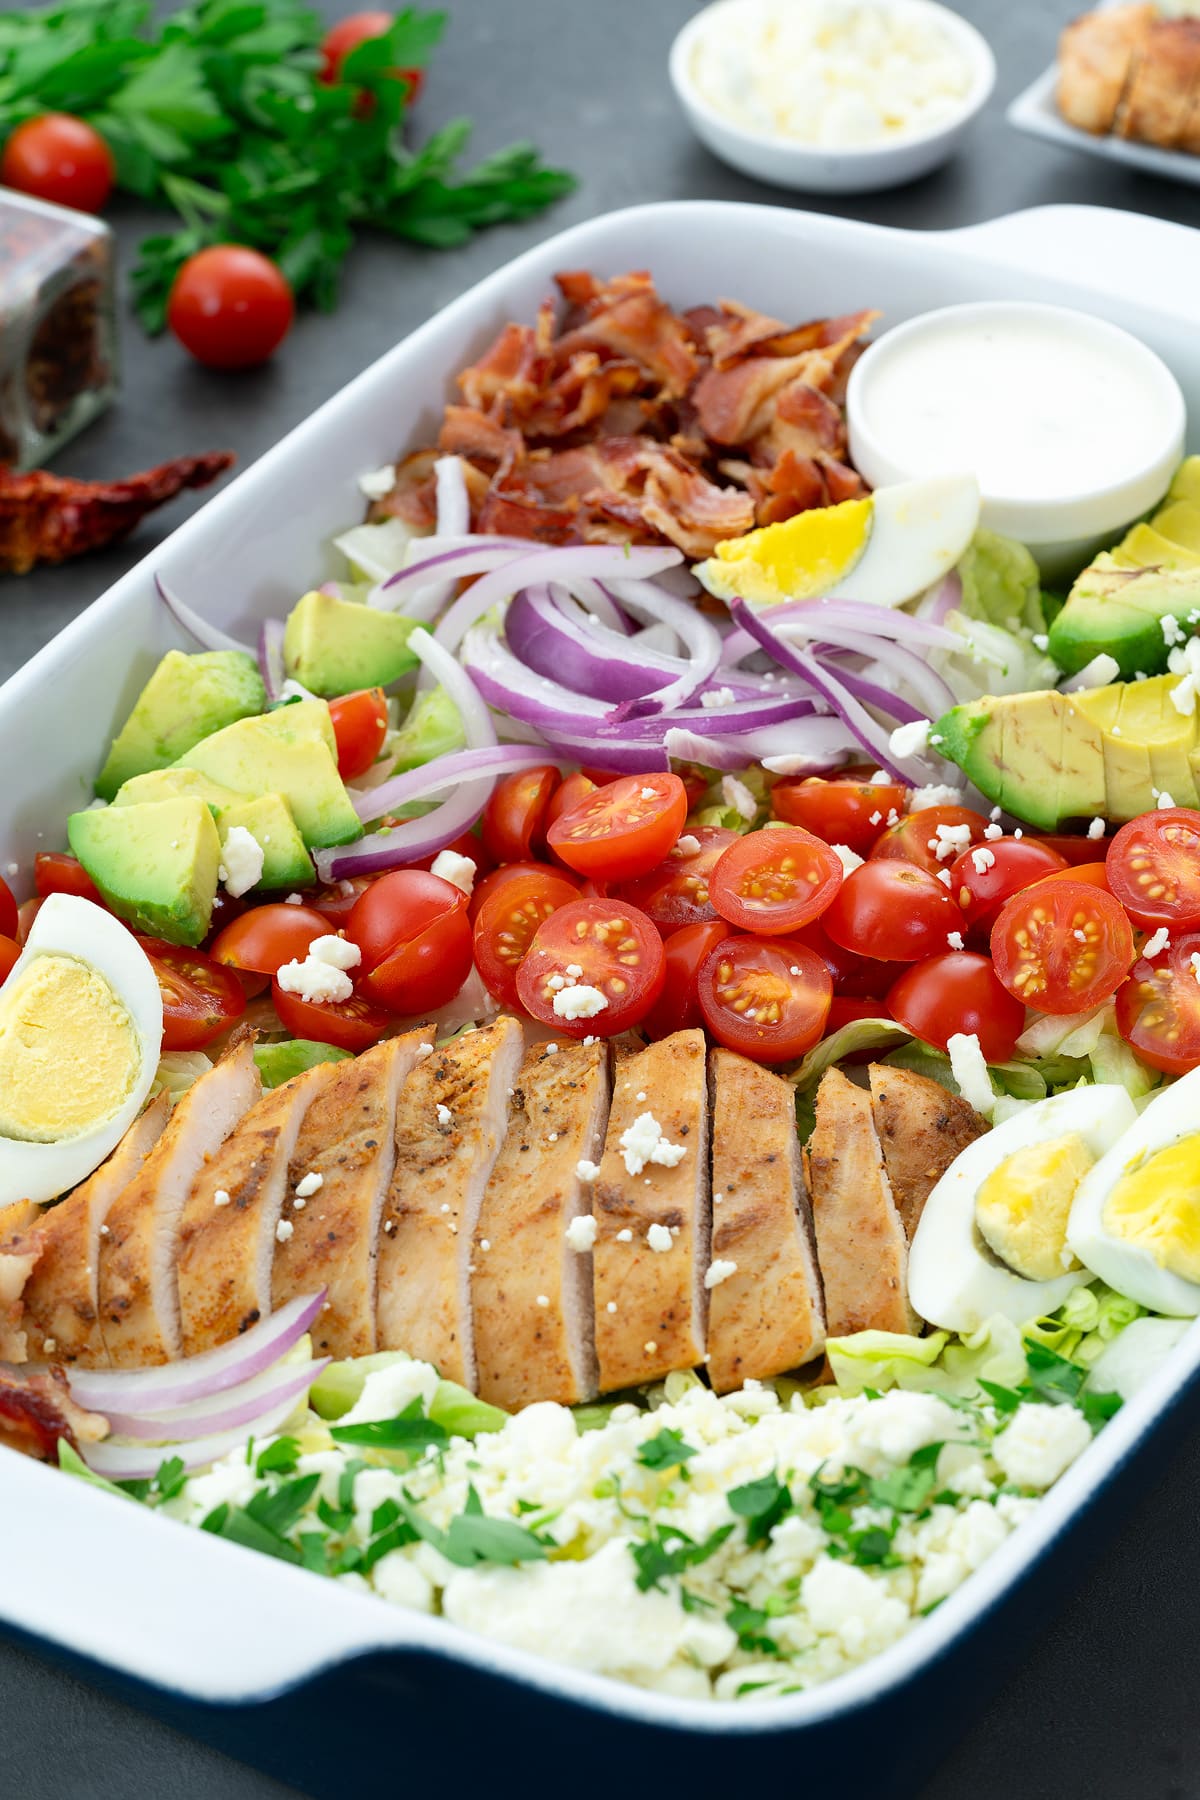 A delicious Cobb salad made with fresh iceberg lettuce, baked chicken breast, bacon, eggs, avocado, cherry tomatoes, ranch dressing, and feta cheese. The salad is beautifully arranged on a serving tray and is ready to be enjoyed.